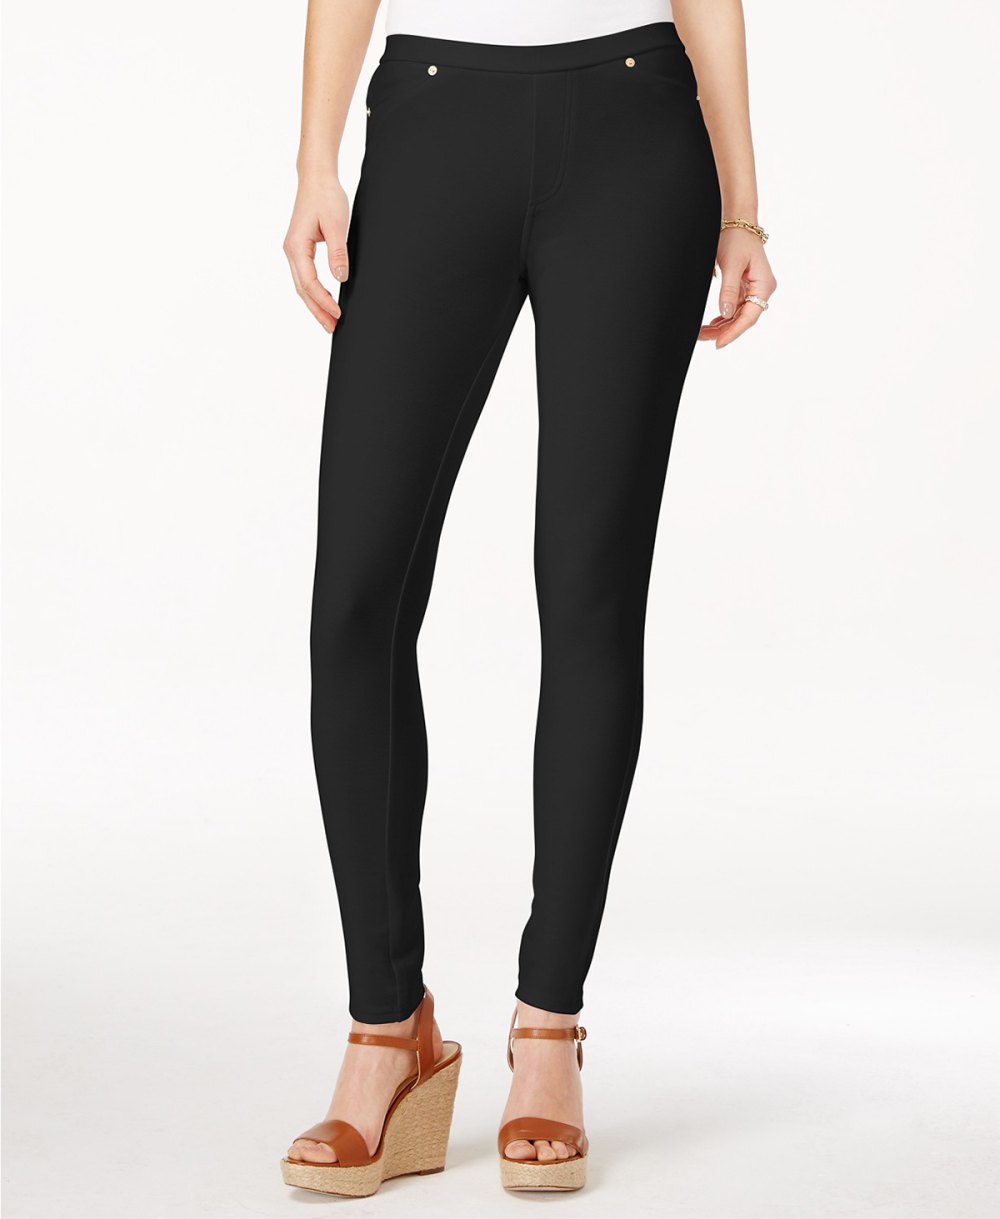 Michael Kors Leggings You Can Even Wear to the Office (25% Off!)